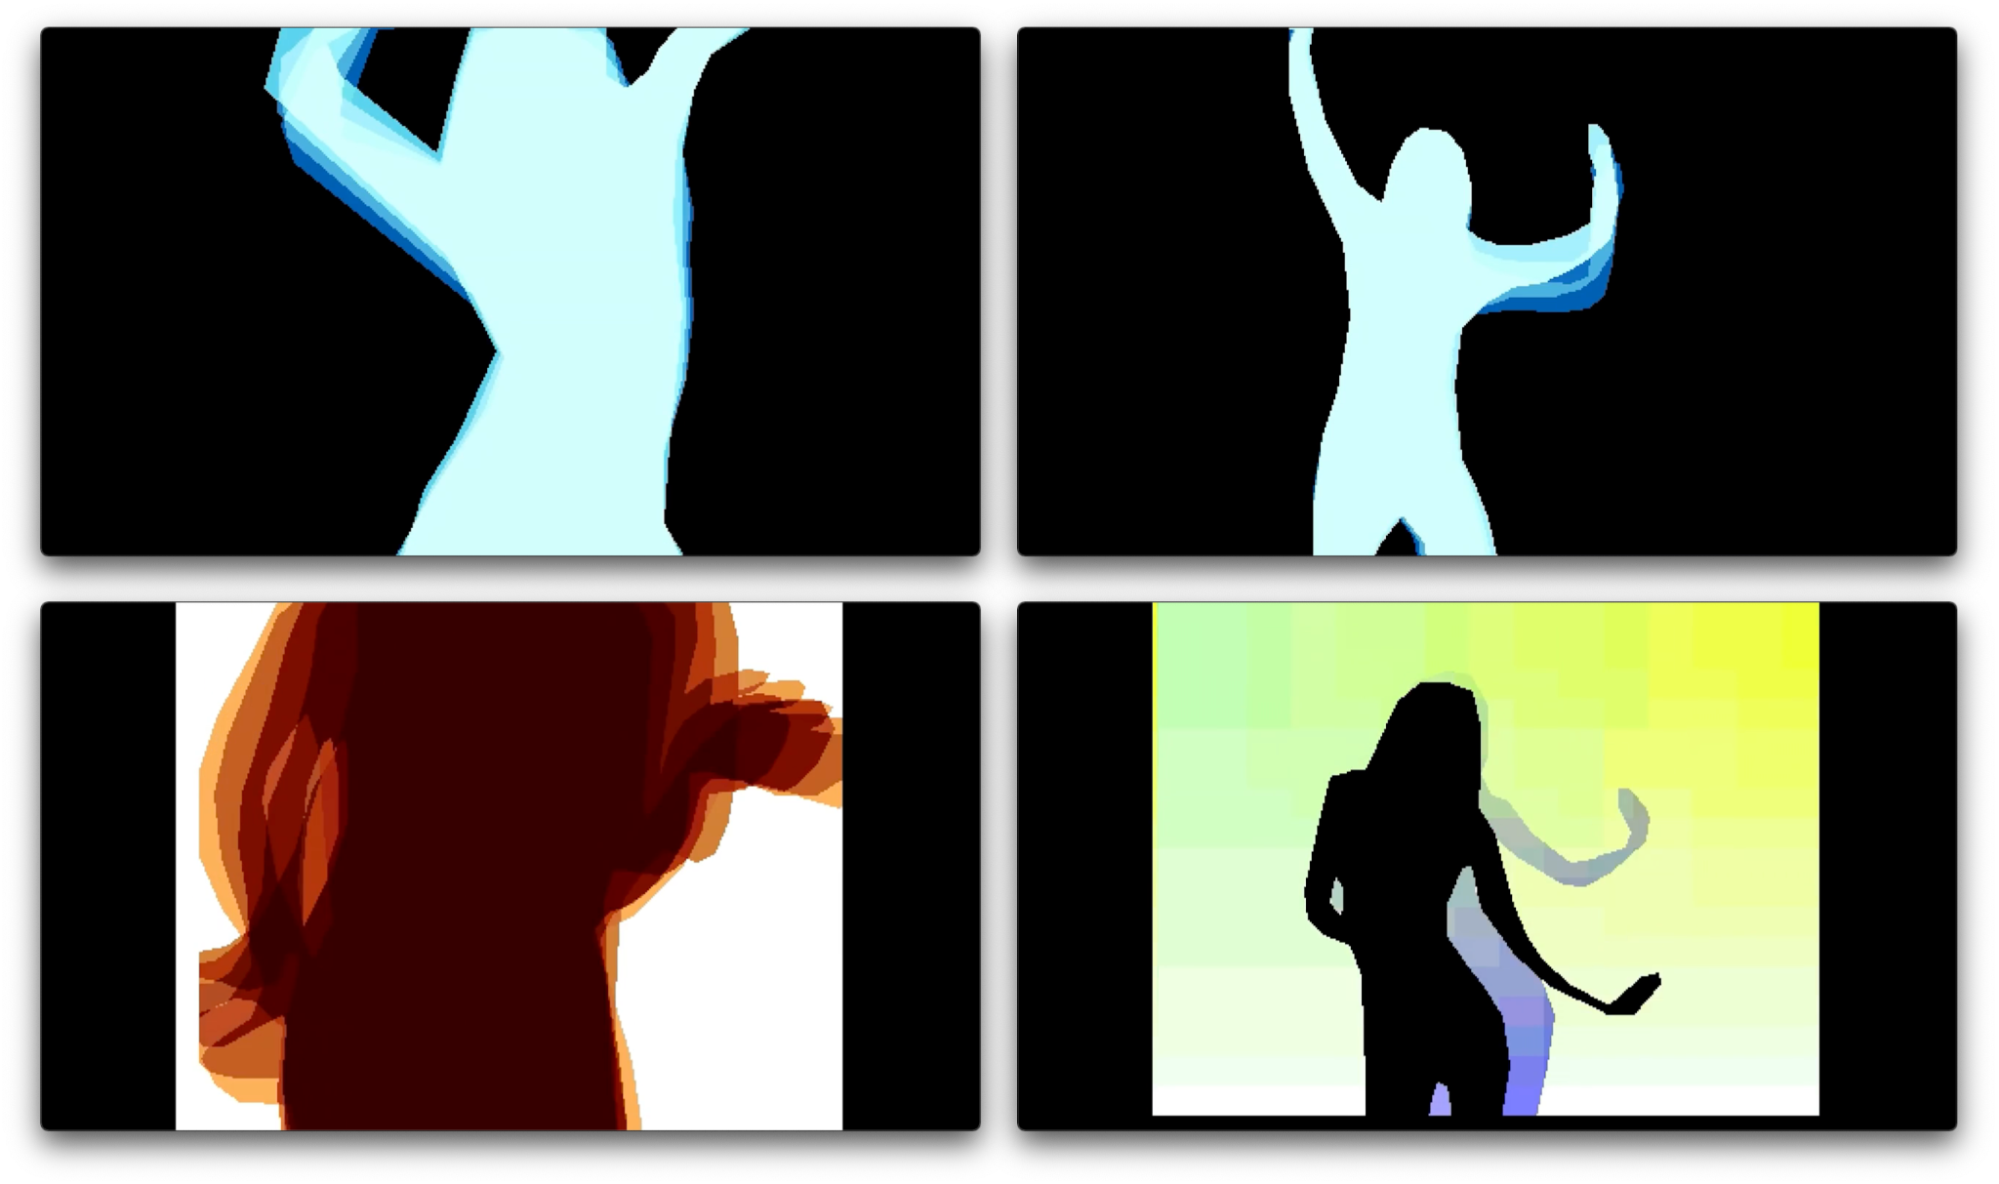 The Silhouettes of Dancers